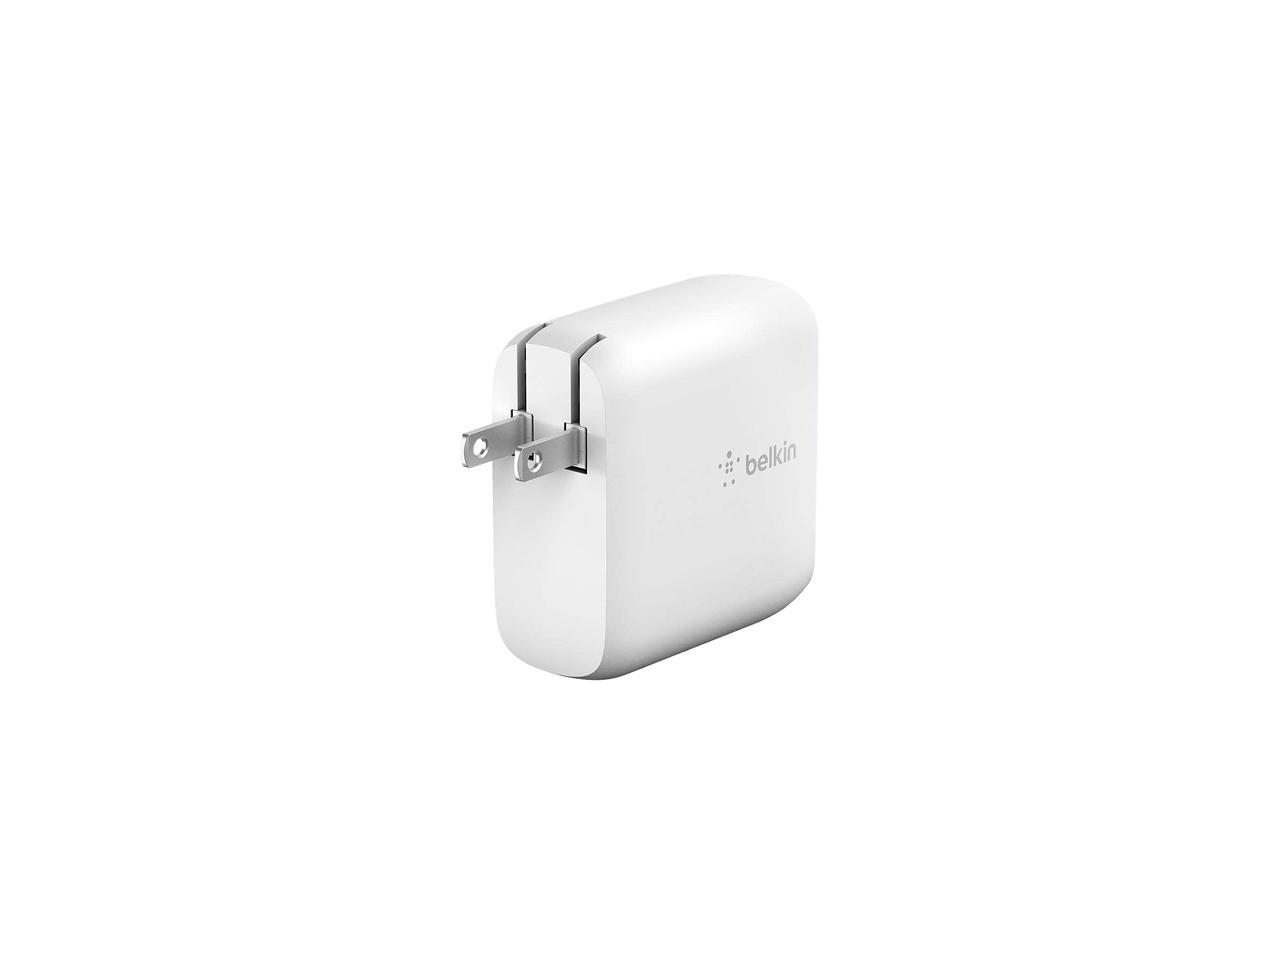 Belkin 68W Dual USB-C Wall Mount GaN Charger PD Power Delivery for iPhone Fast Charger, MacBook Pro Charger, iPad Pro, Pixel, Galaxy, and More (WCH003DQWH)